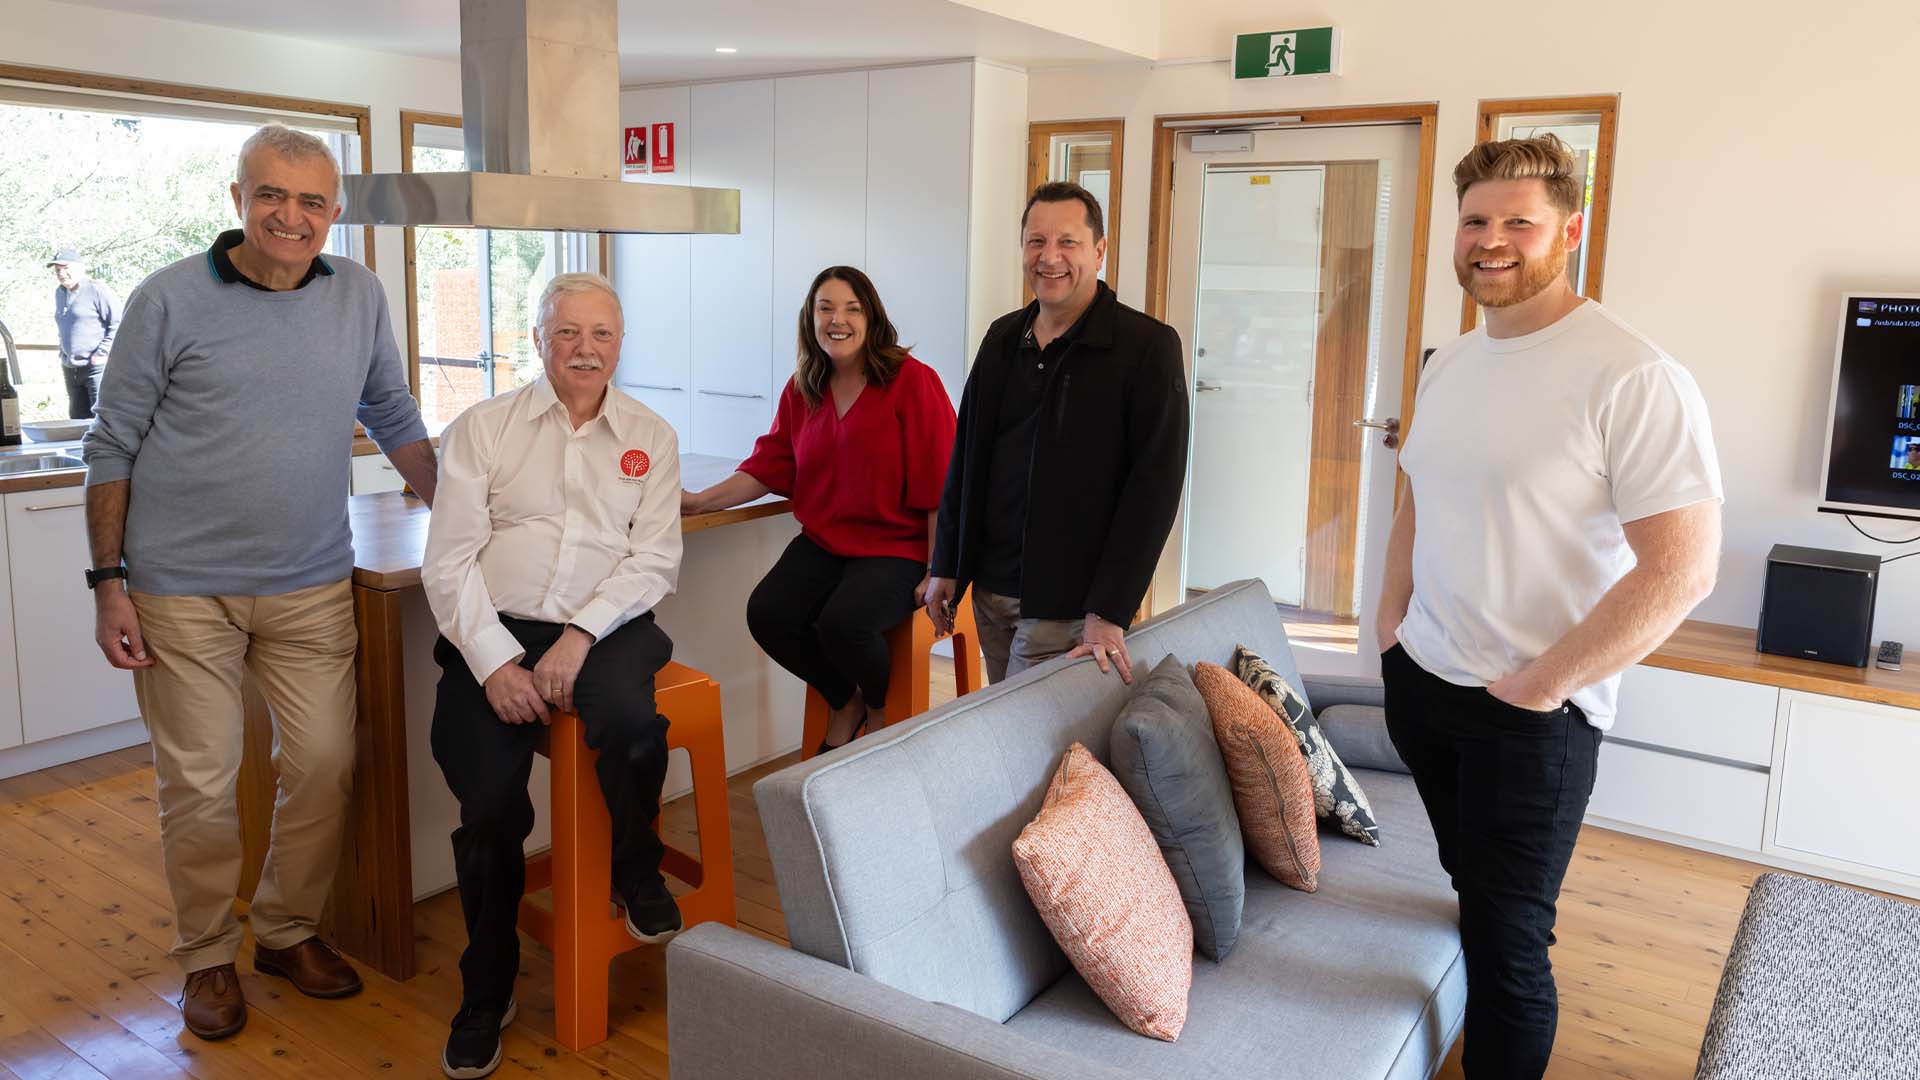 Academics and politicians pose inside the Illawarra Flame House